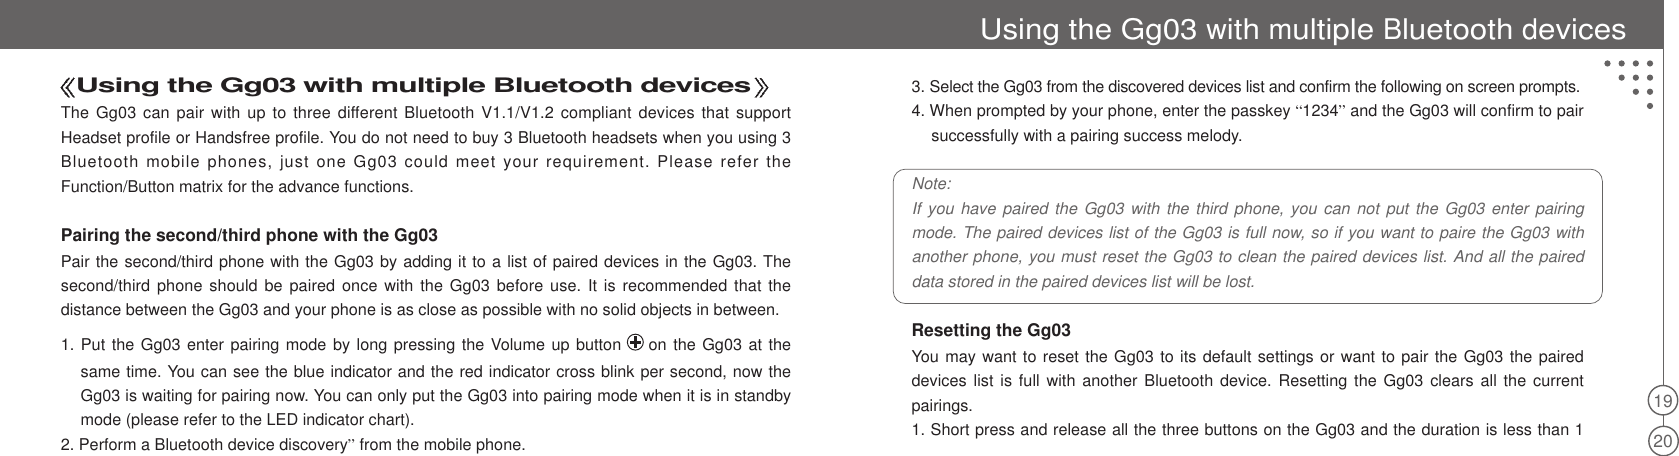 19203. Select the Gg03 from the discovered devices list and confirm the following on screen prompts.4. When prompted by your phone, enter the passkey “1234”and the Gg03 will confirm to pairsuccessfully with a pairing success melody.Note:If you have paired the Gg03 with the third phone, you can not put the Gg03 enter pairingmode. The paired devices list of the Gg03 is full now, so if you want to paire the Gg03 withanother phone, you must reset the Gg03 to clean the paired devices list. And all the paireddata stored in the paired devices list will be lost.Resetting the Gg03You may want to reset the Gg03 to its default settings or want to pair the Gg03 the paireddevices list is full with another Bluetooth device. Resetting the Gg03 clears all the currentpairings.1. Short press and release all the three buttons on the Gg03 and the duration is less than 1Using the Gg03 with multiple Bluetooth devicesThe Gg03 can pair with up to three different Bluetooth V1.1/V1.2 compliant devices that supportHeadset profile or Handsfree profile. You do not need to buy 3 Bluetooth headsets when you using 3Bluetooth mobile phones, just one Gg03 could meet your requirement. Please refer theFunction/Button matrix for the advance functions.Pairing the second/third phone with the Gg03Pair the second/third phone with the Gg03 by adding it to a list of paired devices in the Gg03. Thesecond/third phone should be paired once with the Gg03 before use. It is recommended that thedistance between the Gg03 and your phone is as close as possible with no solid objects in between.1. Put the Gg03 enter pairing mode by long pressing the Volume up button on the Gg03 at thesame time. You can see the blue indicator and the red indicator cross blink per second, now theGg03 is waiting for pairing now. You can only put the Gg03 into pairing mode when it is in standbymode (please refer to the LED indicator chart).2. Perform a Bluetooth device discovery”from the mobile phone.Using the Gg03 with multiple Bluetooth devices